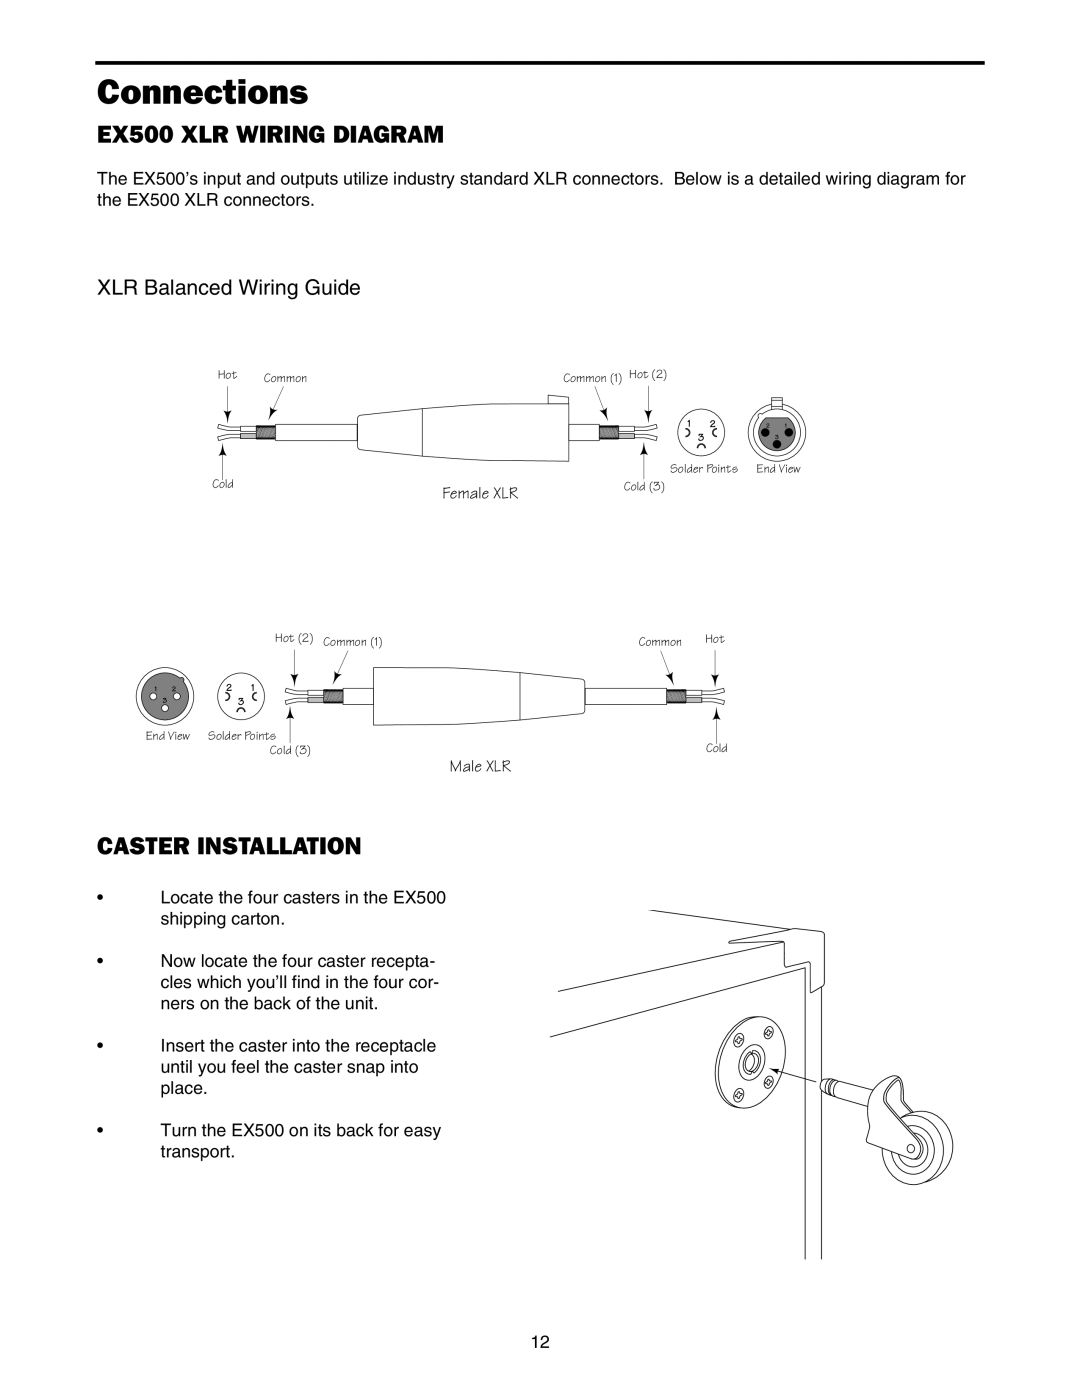 Samson owner manual Connections, EX500 XLR WIRING DIAGRAM, Caster Installation 